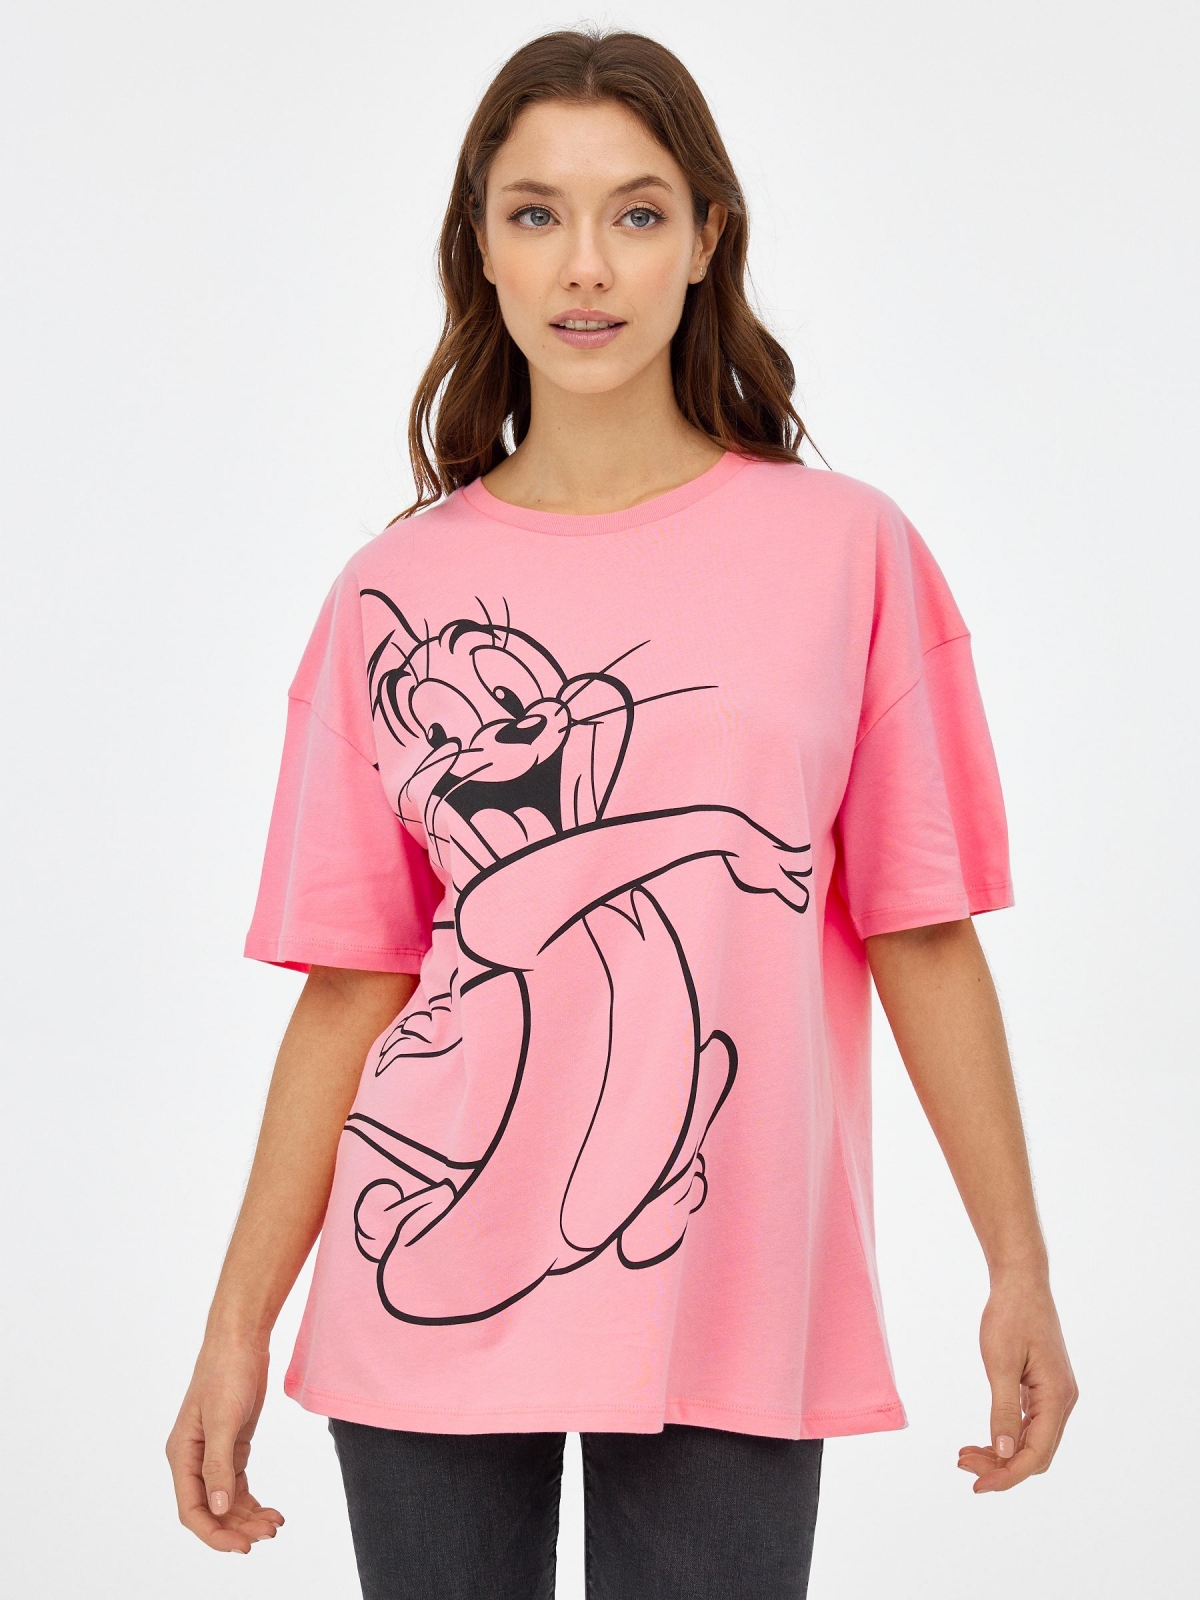 Tom & Jerry oversized T-shirt light pink middle front view